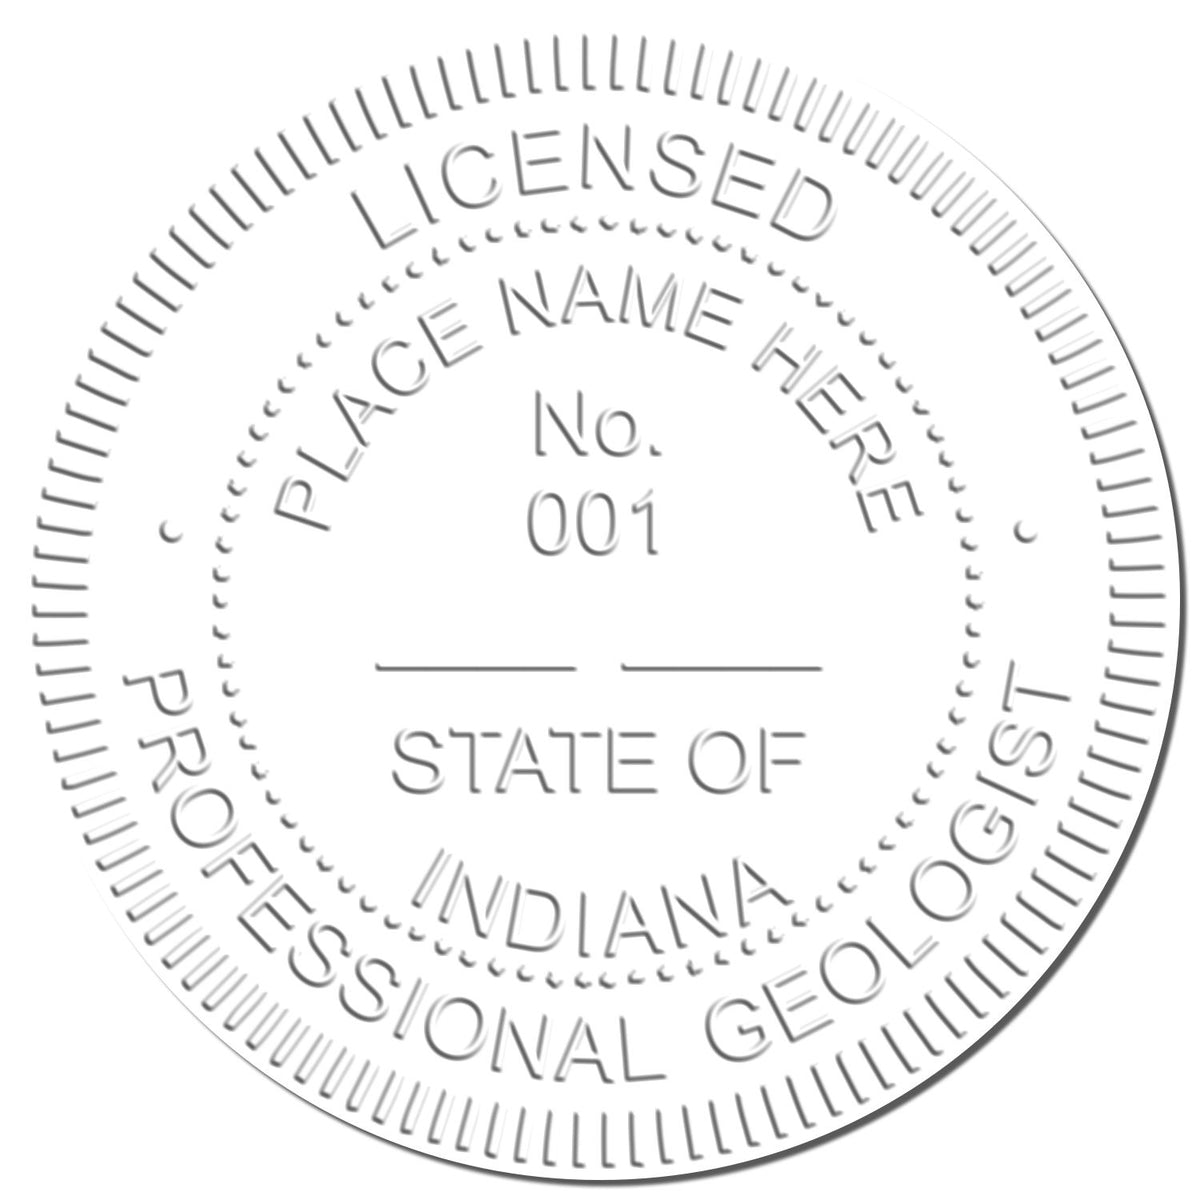 A stamped imprint of the Soft Indiana Professional Geologist Seal in this stylish lifestyle photo, setting the tone for a unique and personalized product.